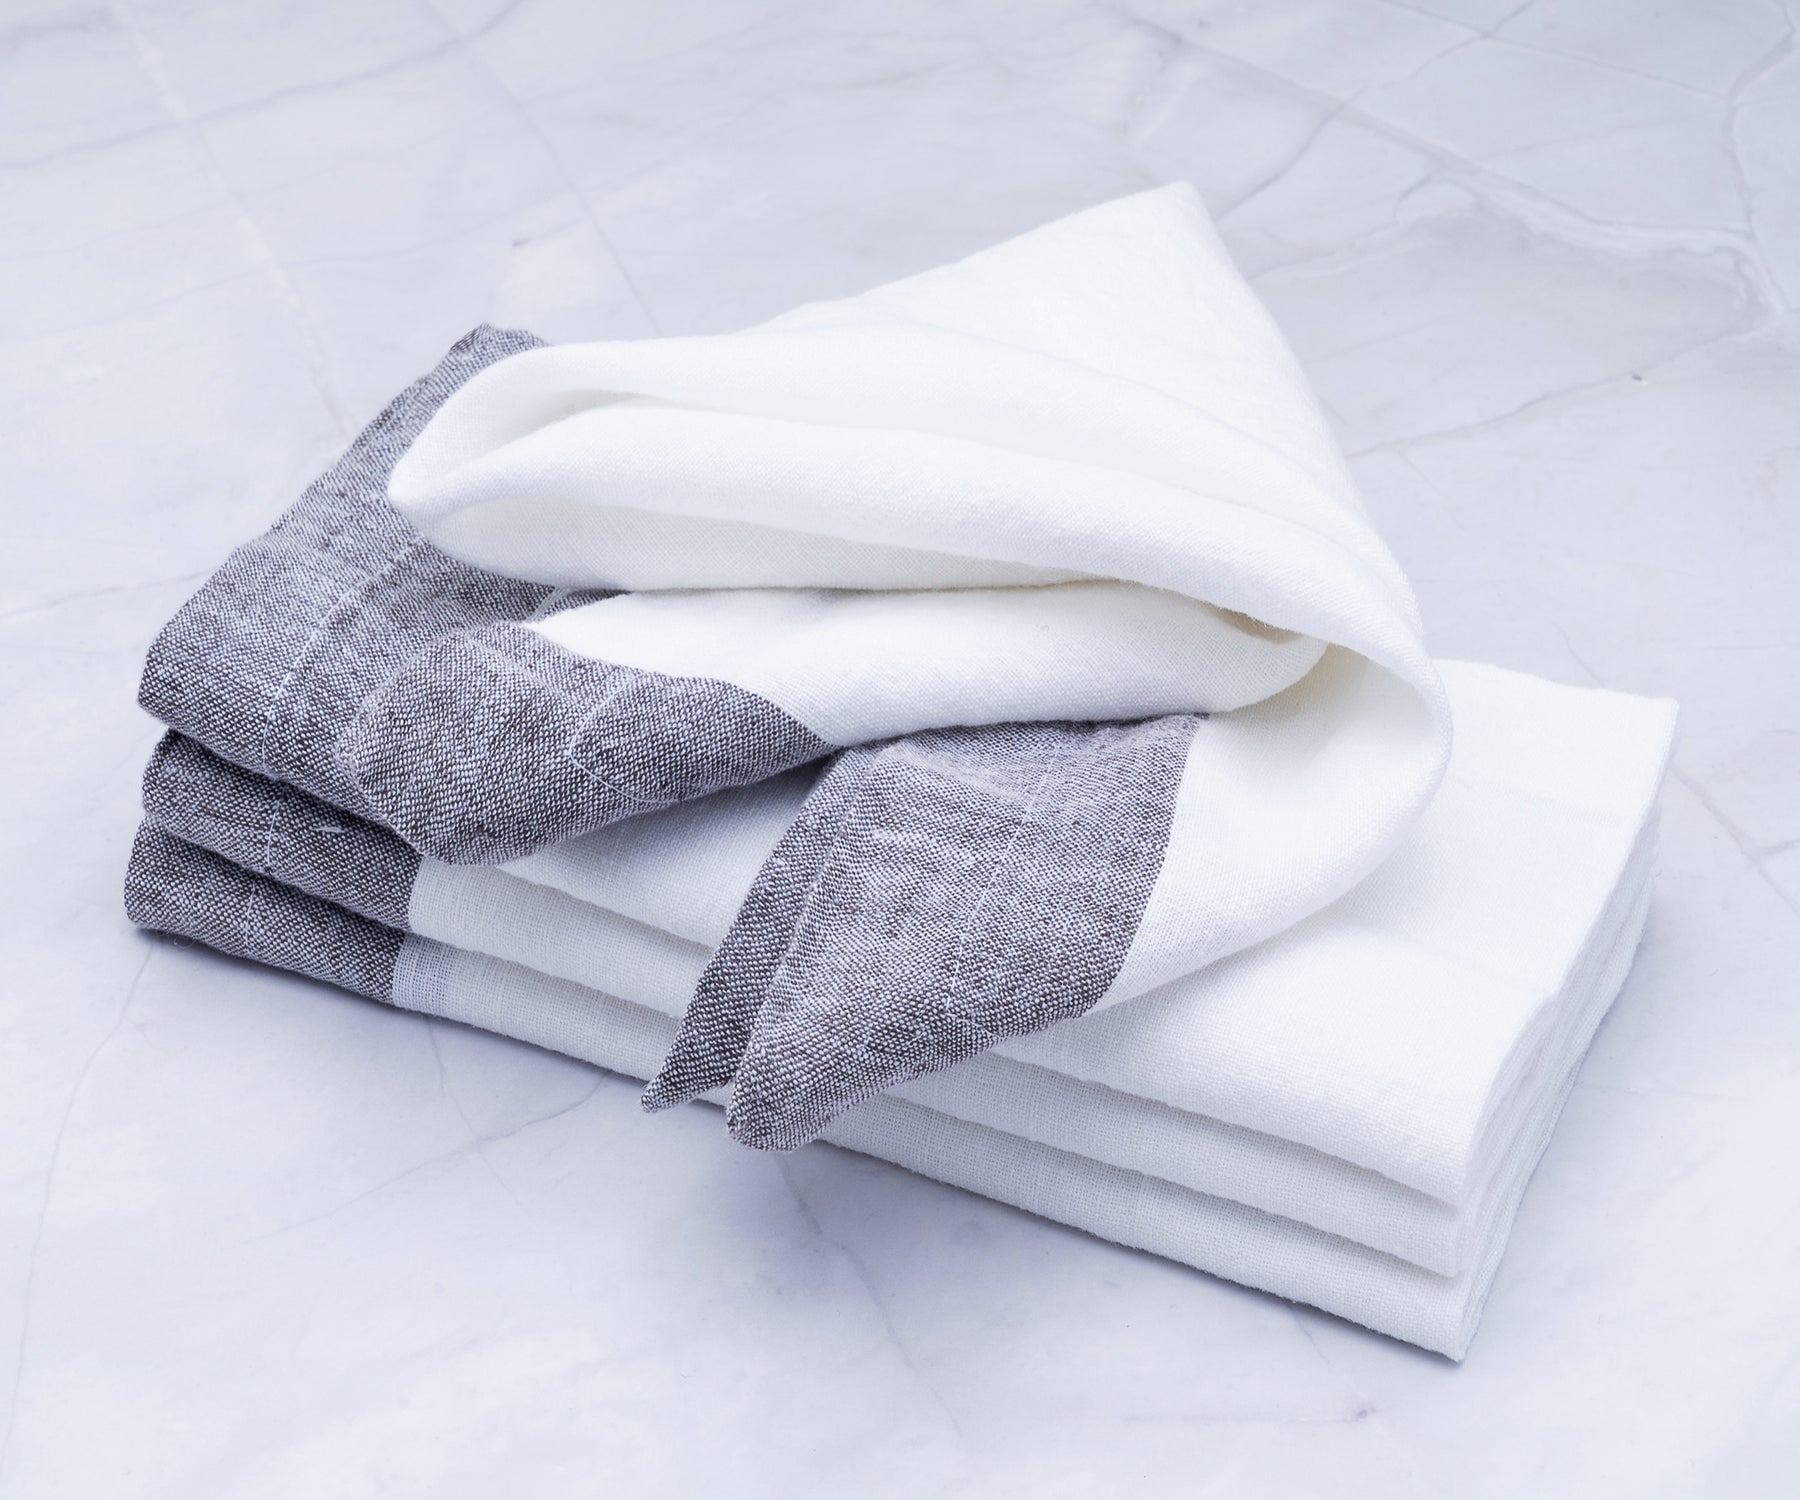 A collection of white cloth napkins for a formal dining setup